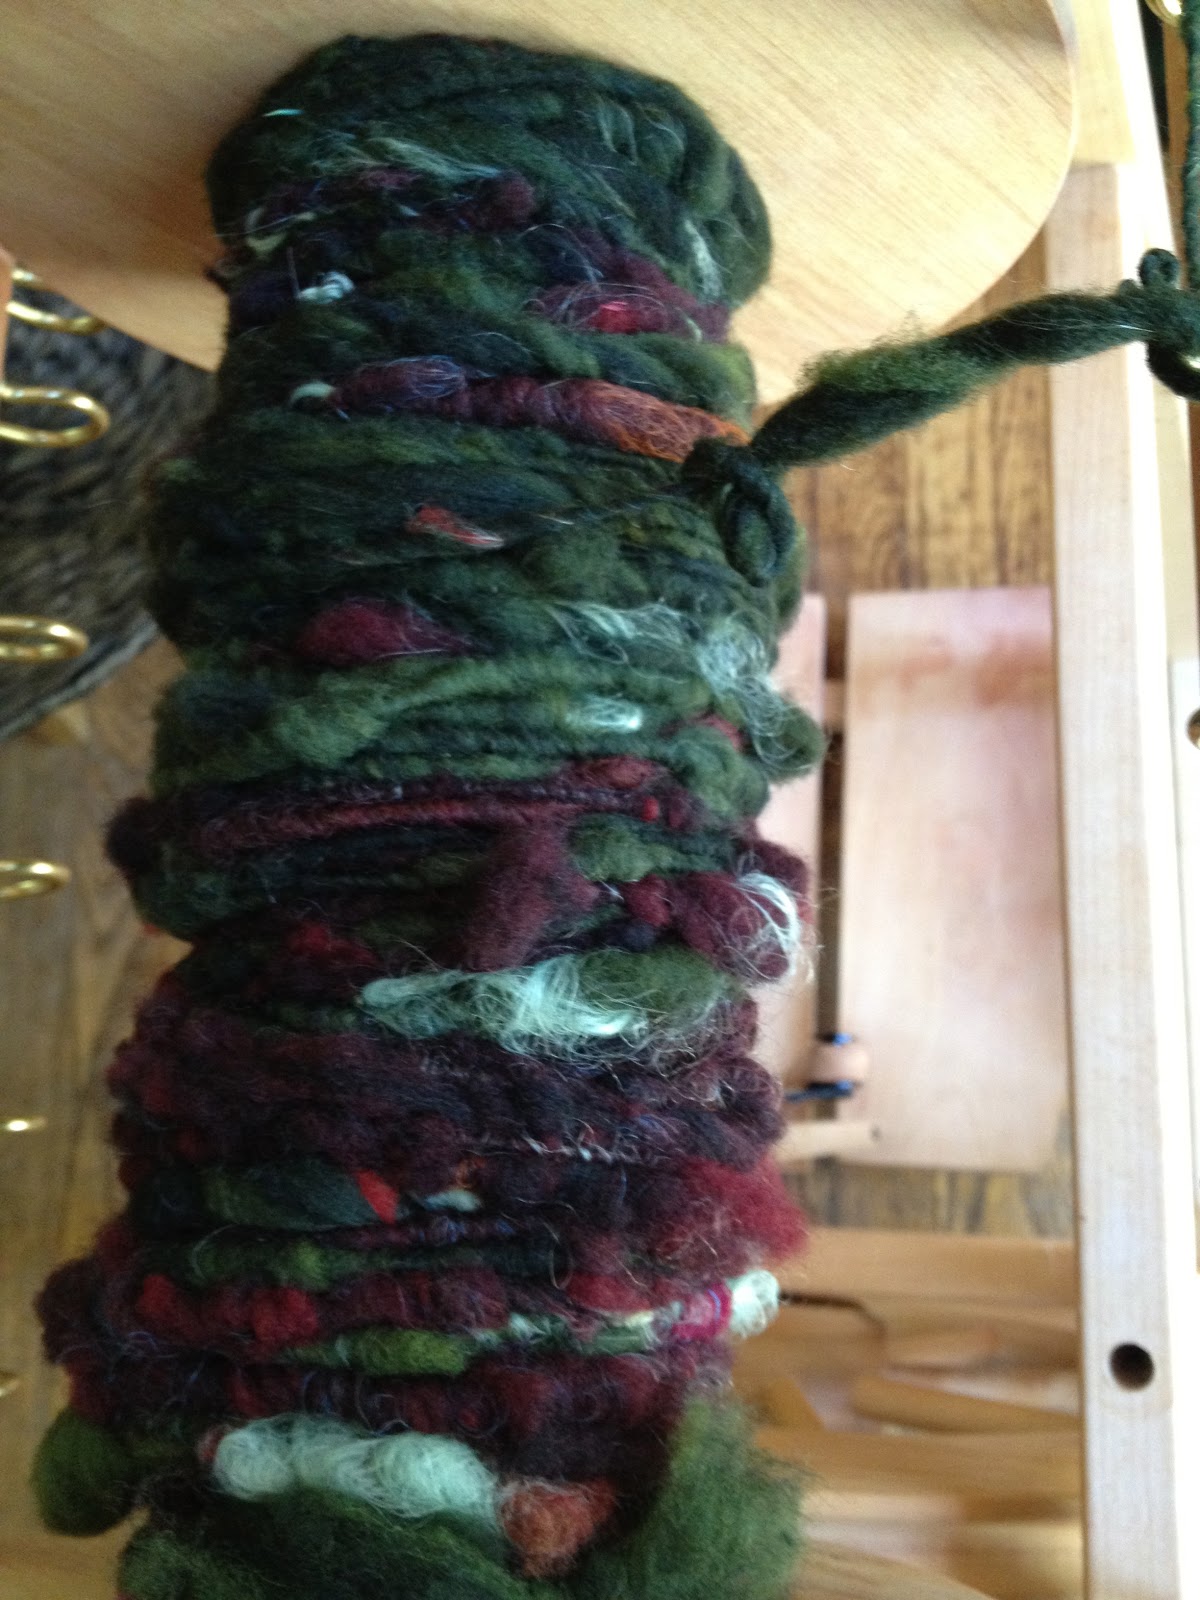 CENTERING WITH FIBER: Spinning yarn with Saori weaving in mind